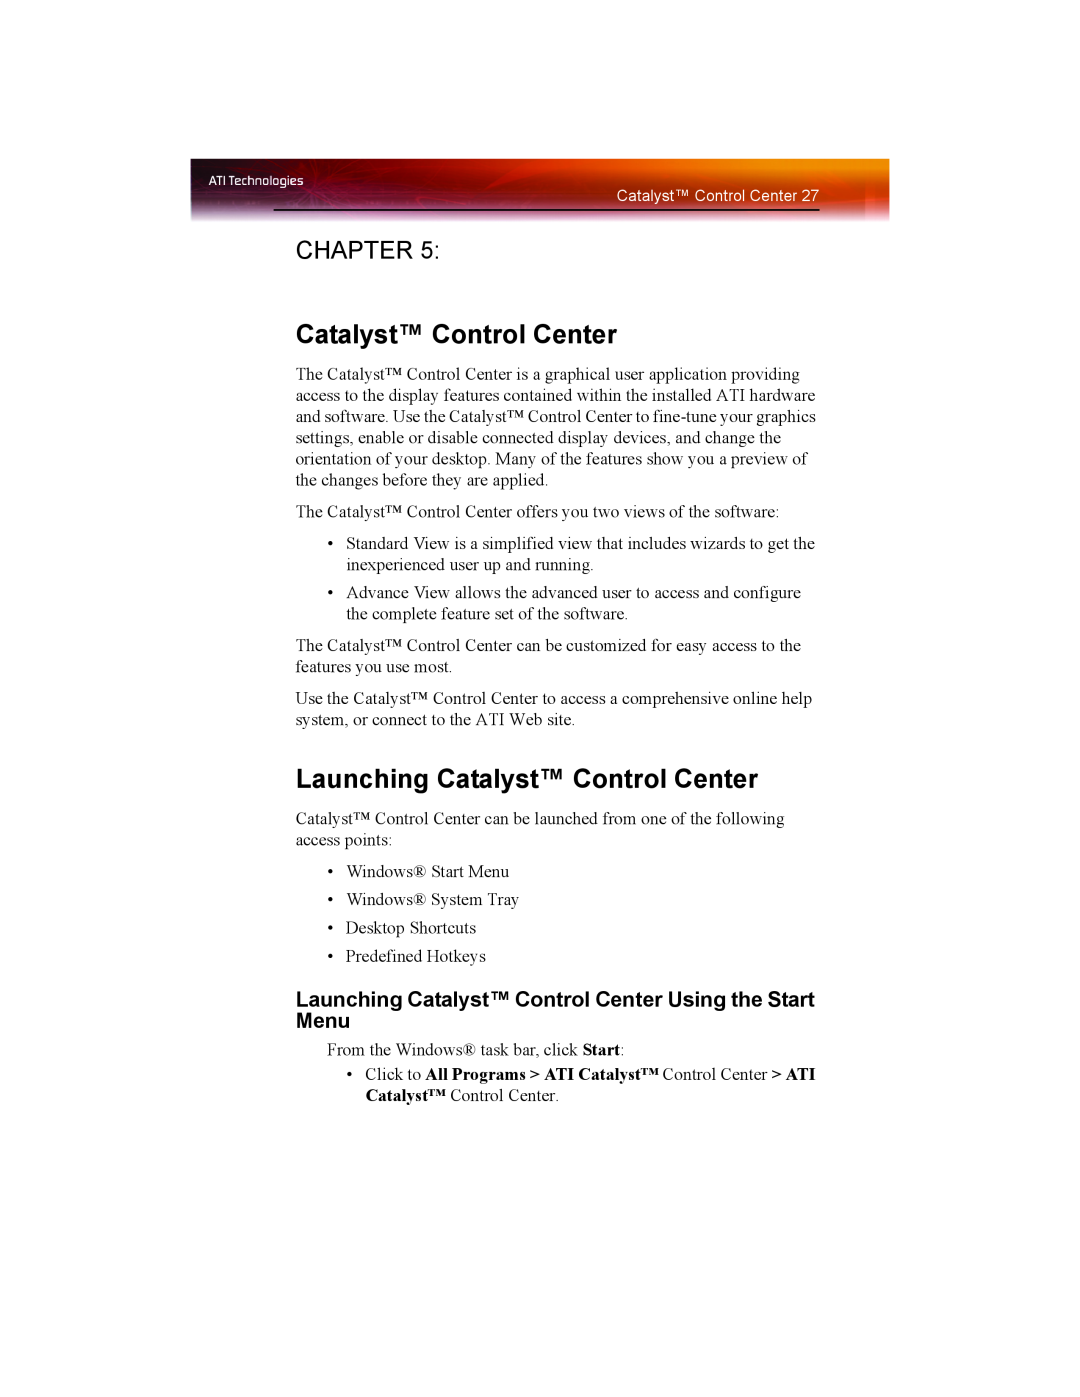 ATI Technologies X1550 SERIES manual Launching Catalyst Control Center, Chapter 